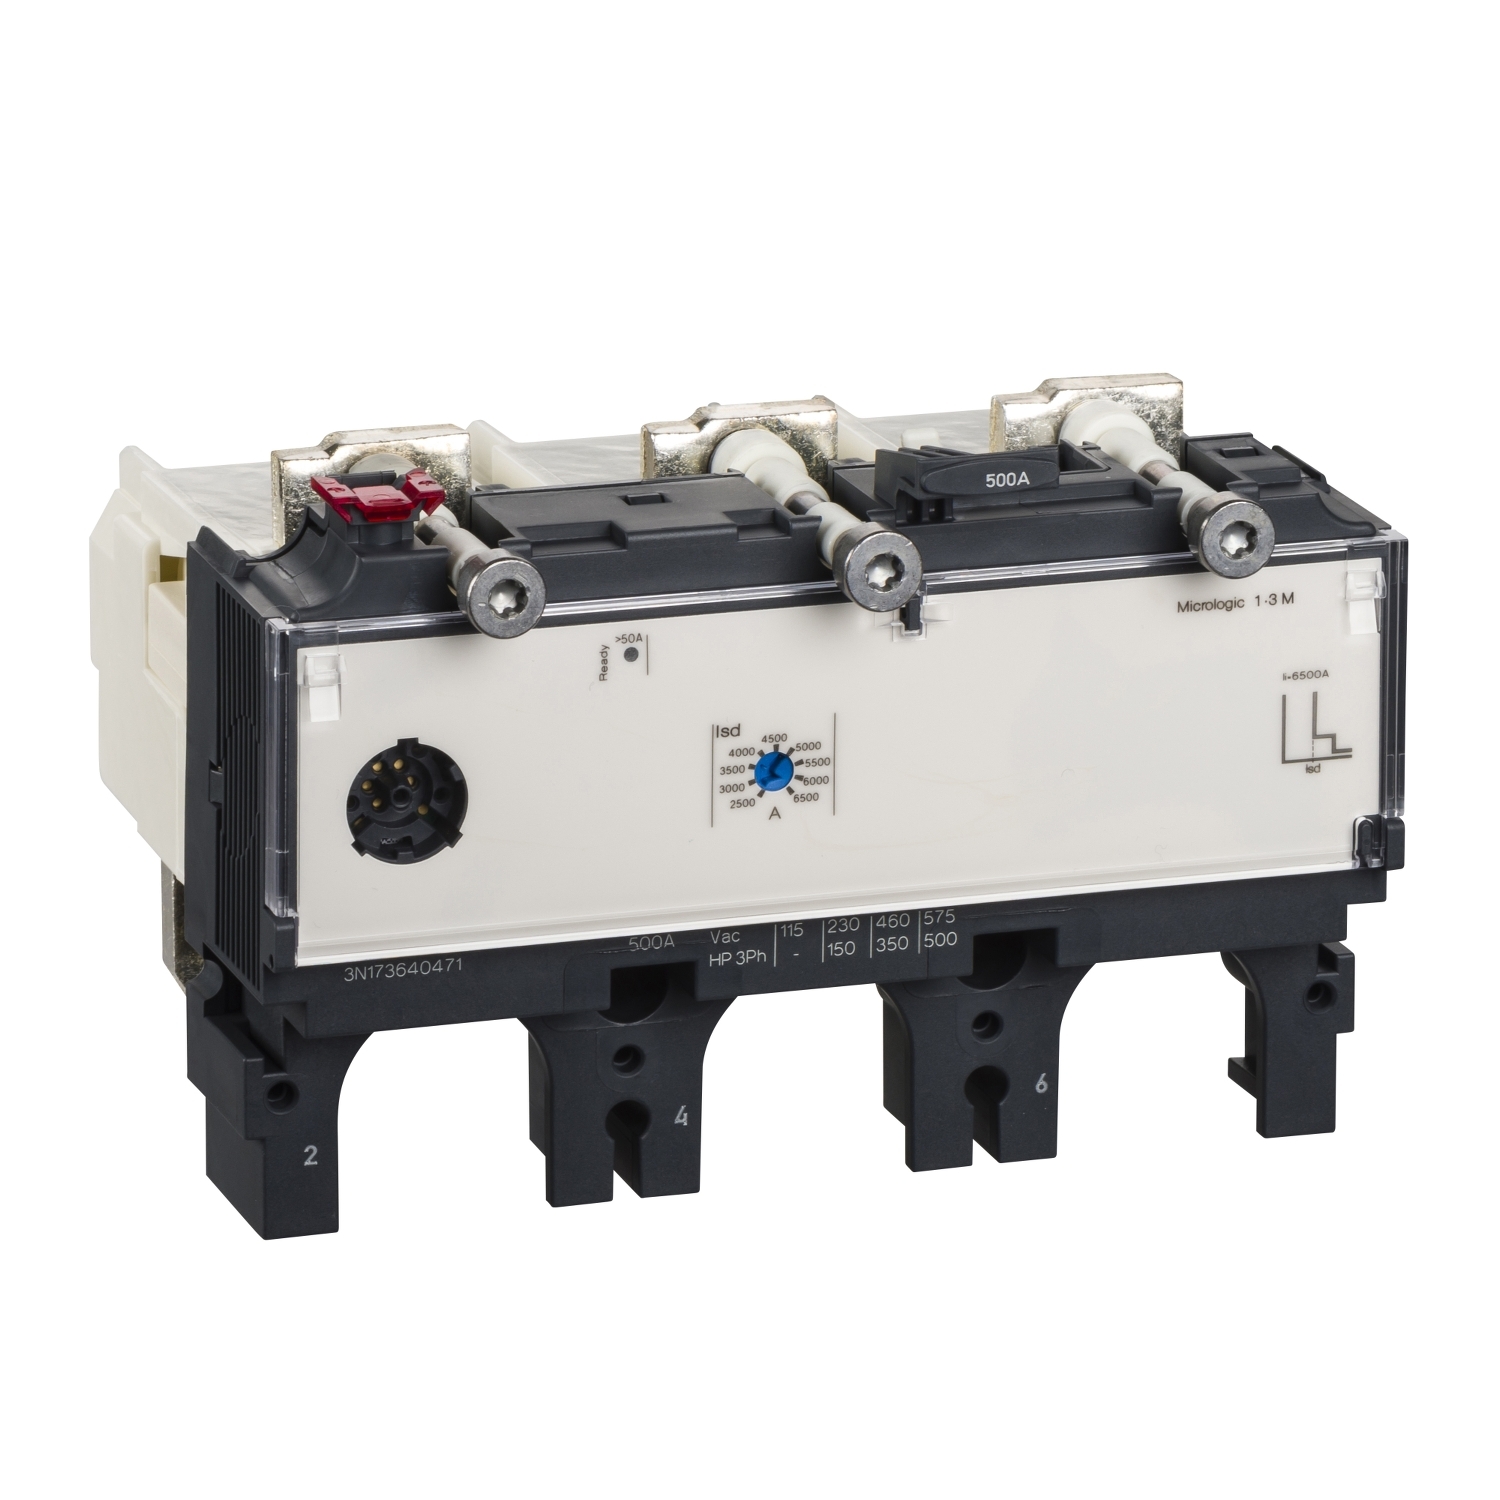 trip unit MicroLogic 1.3 M for ComPact NSX 630 circuit breakers, electronic, rating 500 A, 3 poles 3d